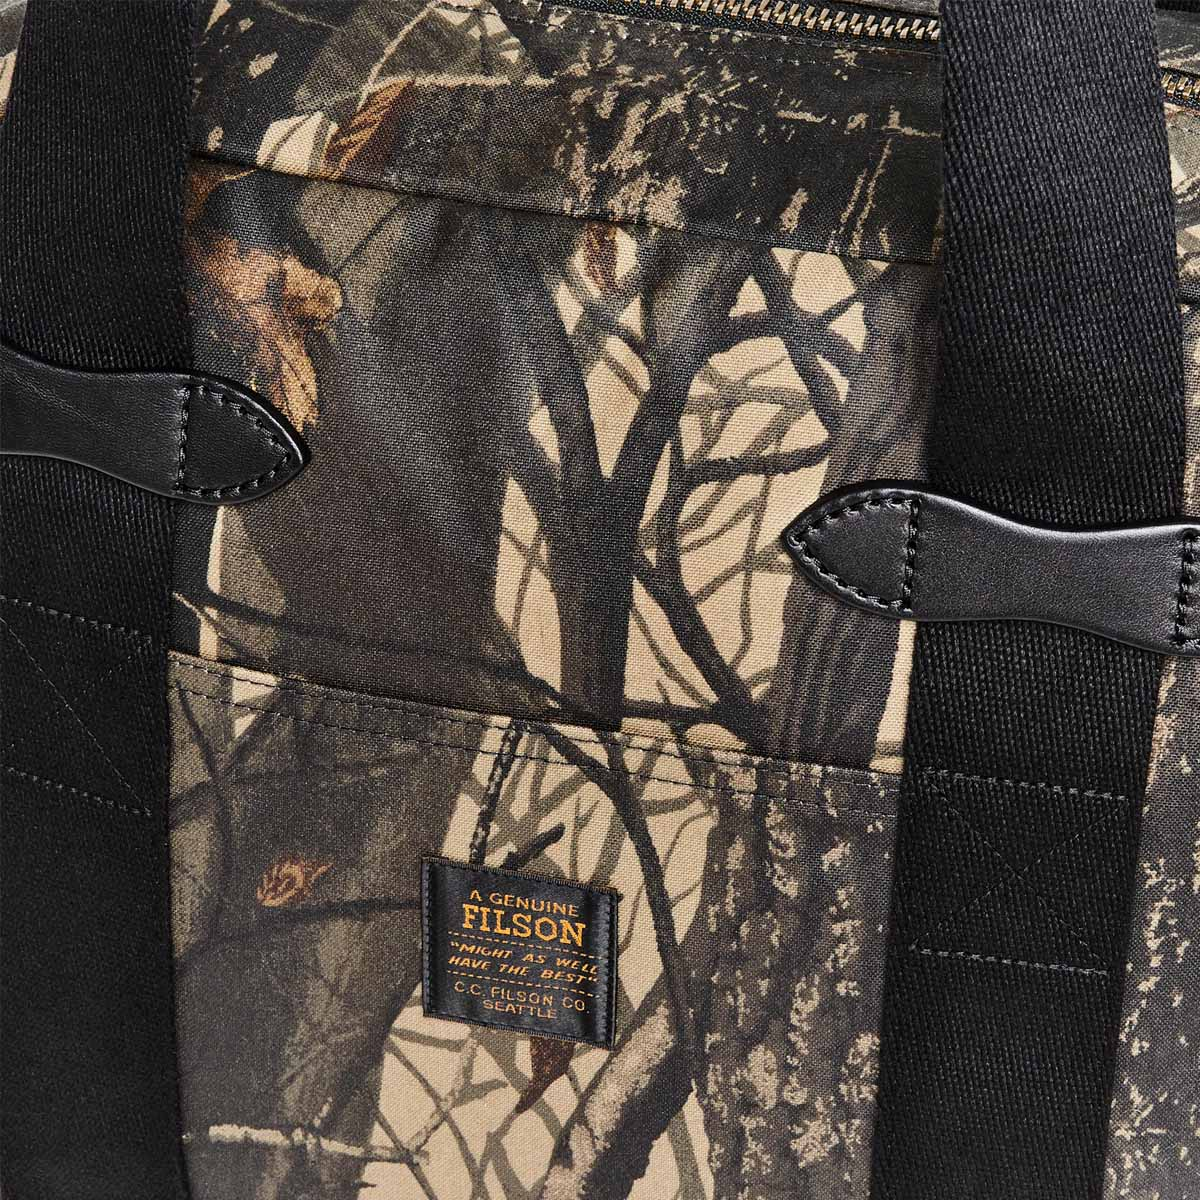 Filson Tin Cloth Tote Bag With Zipper Realtree Hardwoods Camo, a waxed-canvas tote bag designed for comfortable carrying on your shoulder